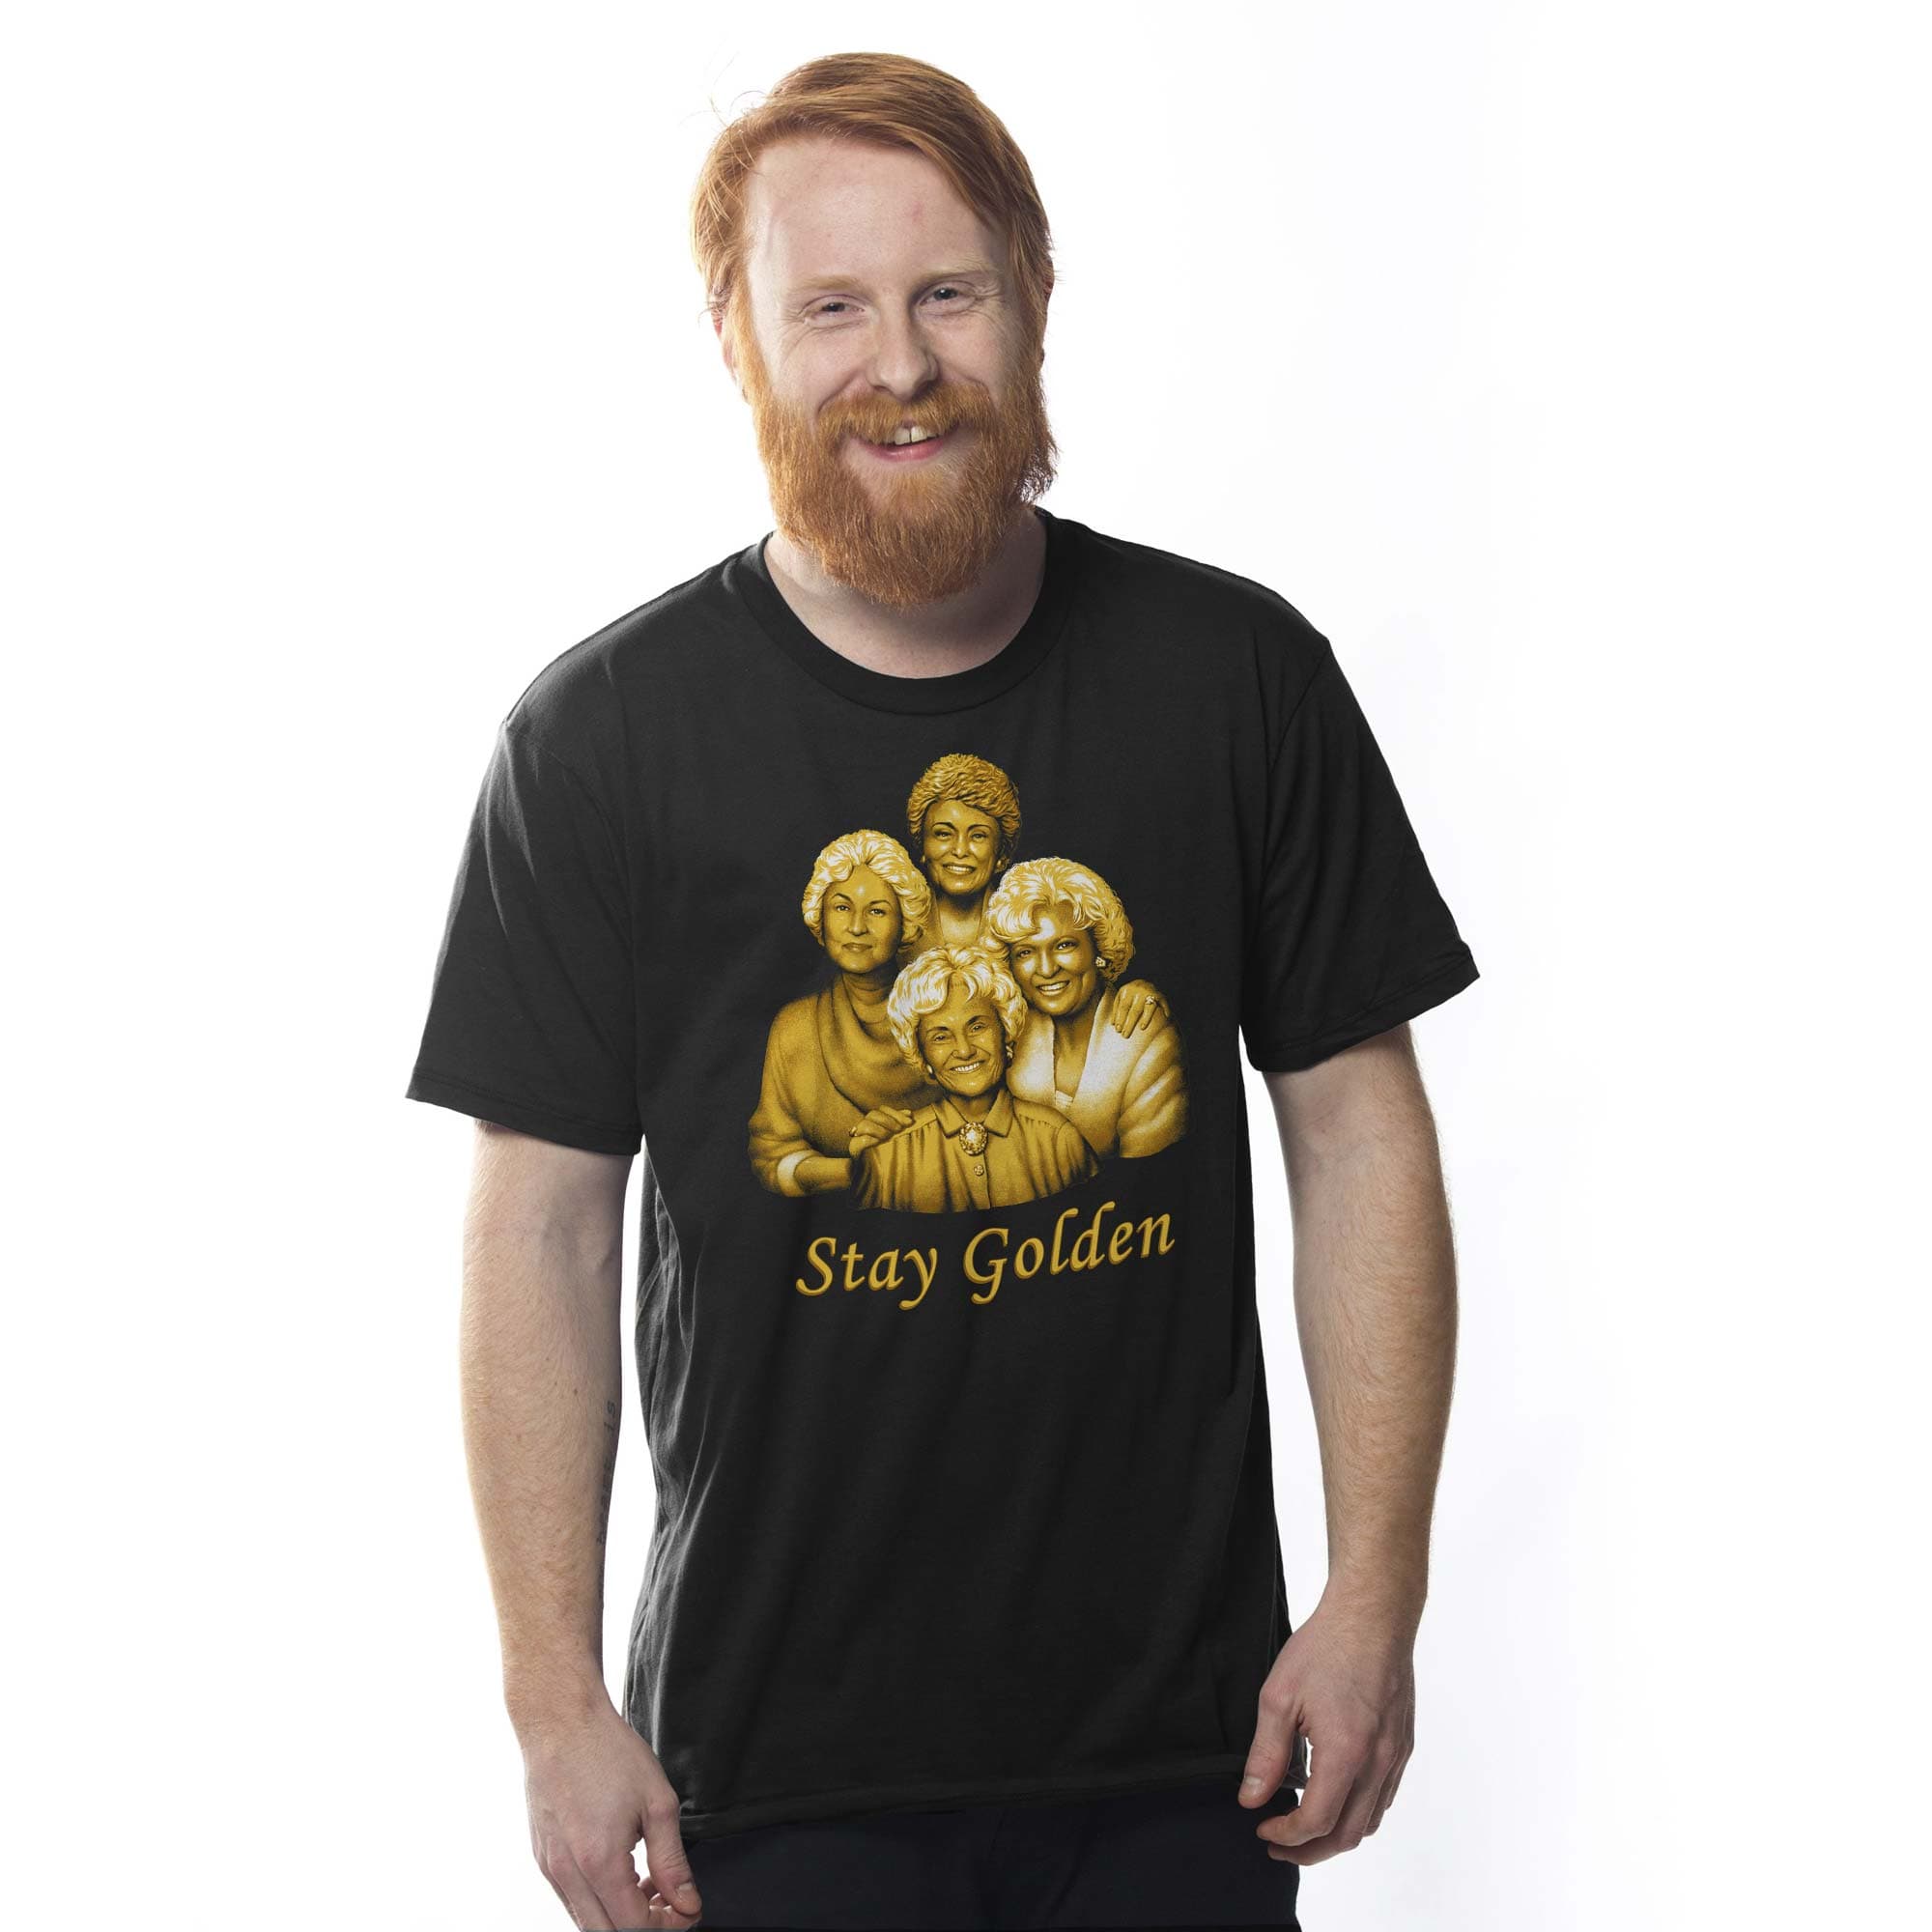 Men's Stay Golden Girls Funny Graphic T-Shirt | Vintage 80s Television Sitcom Tee | Solid Threads